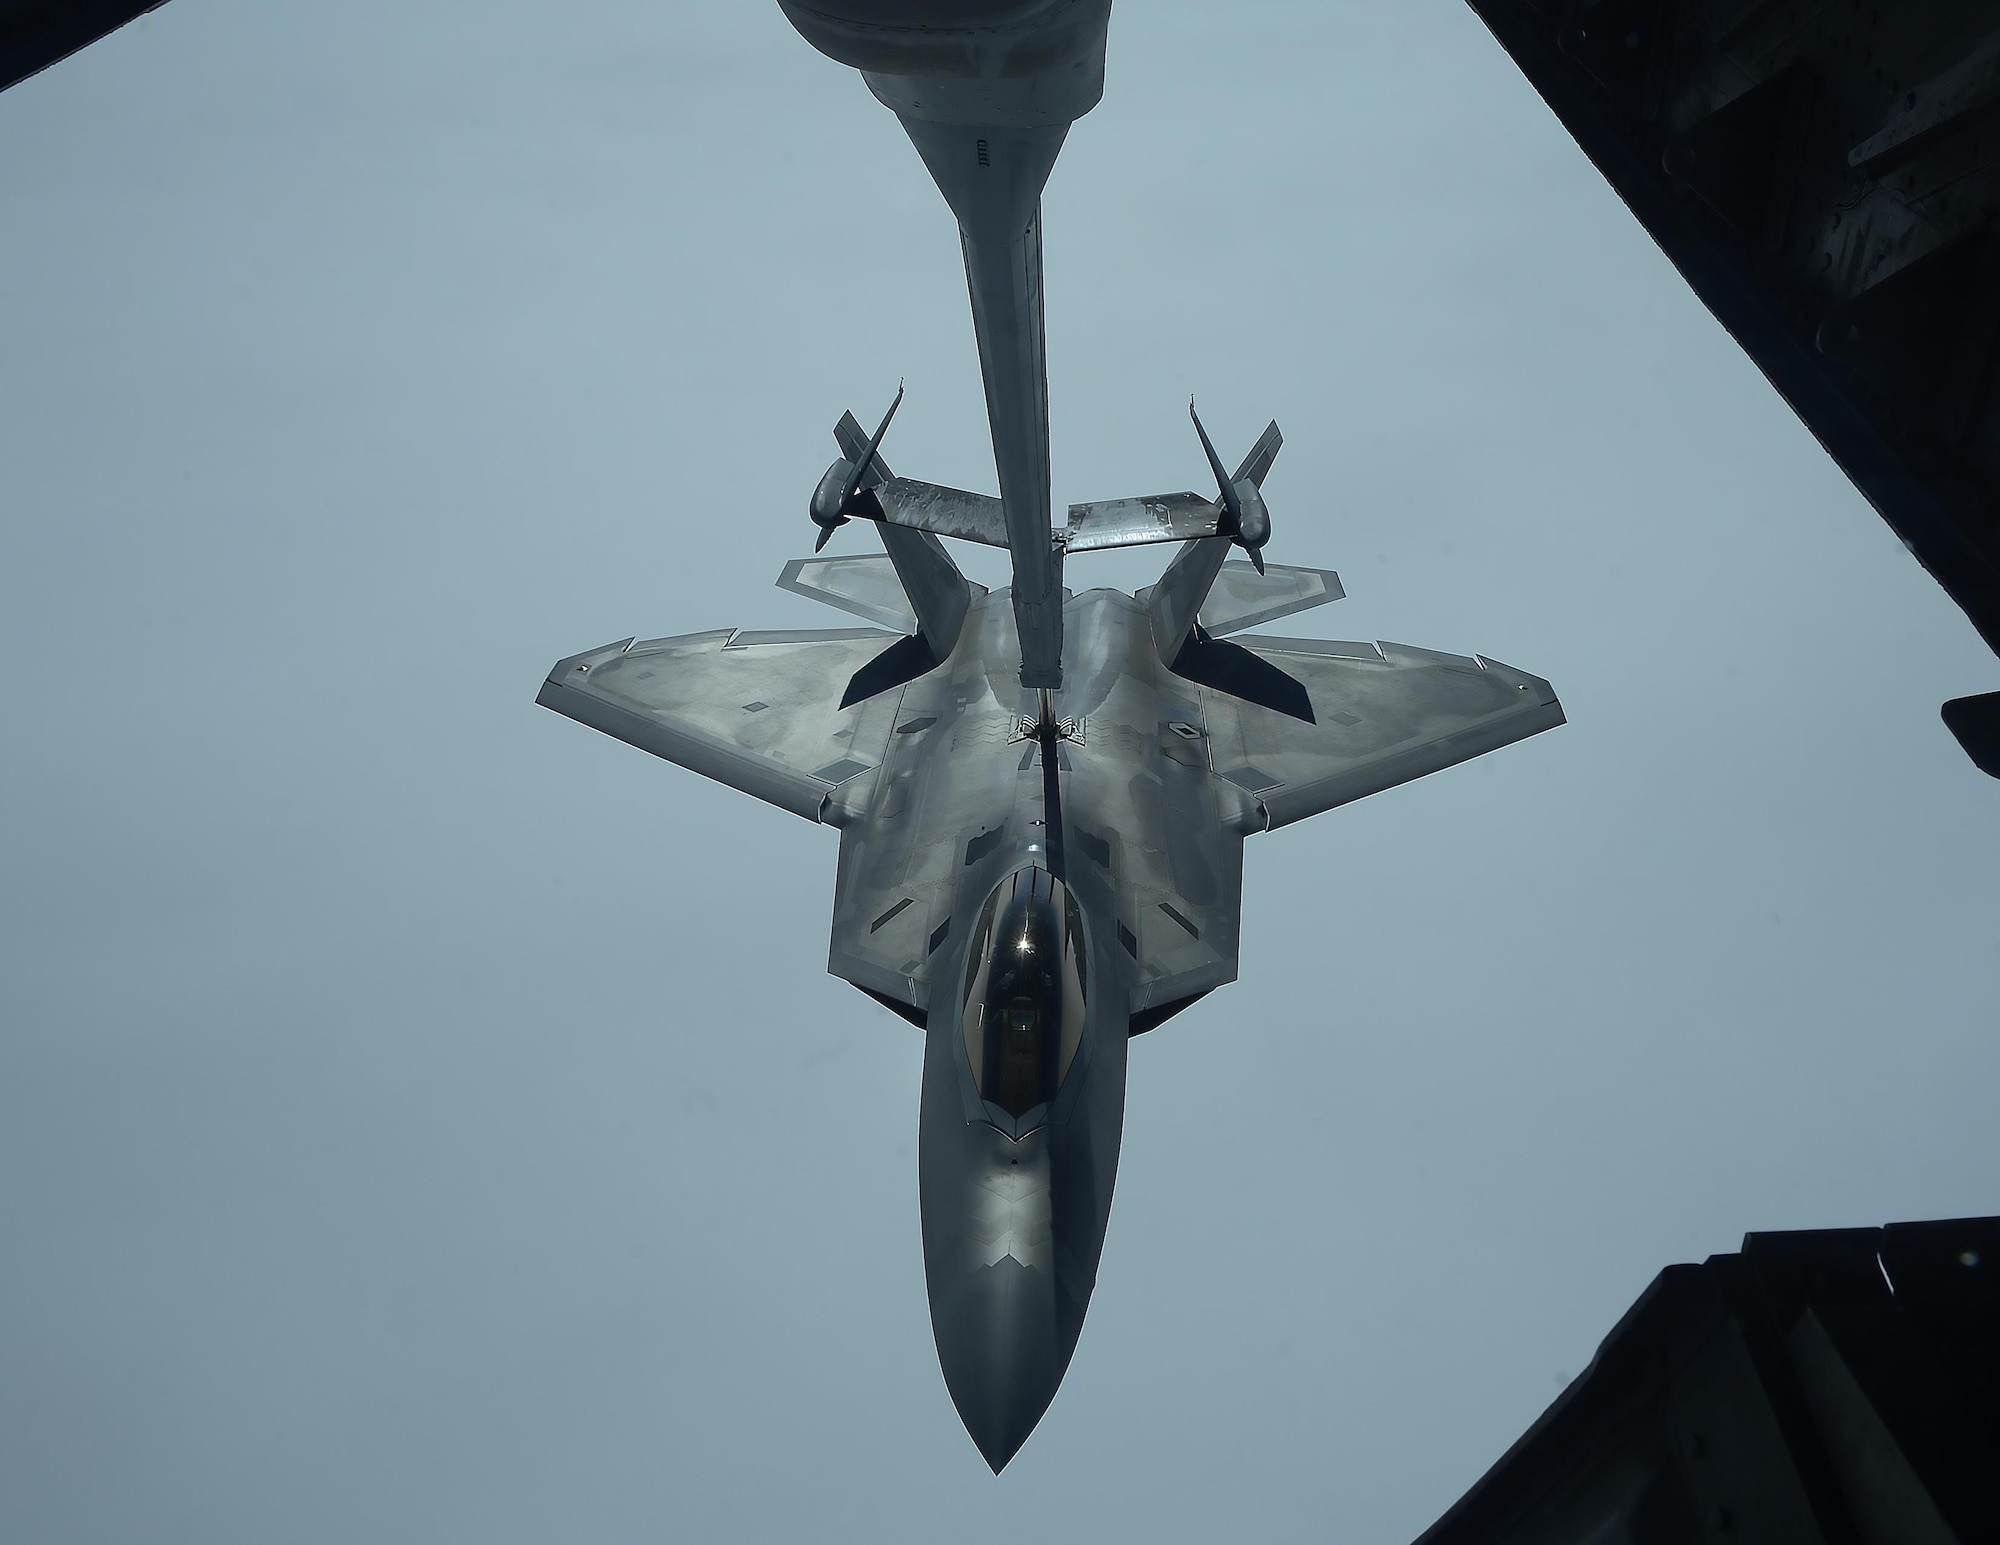 A U.S. Air Force F-22 Raptor is refueled by a KC-10 Extender from the 9th Air Refueling Squadron, Travis Air Force Base, Calif., during exercise Northern Edge 2017, May 4, 2017. NE17 is Alaska’s premier joint training exercise designed to practice operations, techniques and procedures, as well as enhance interoperability among the services.